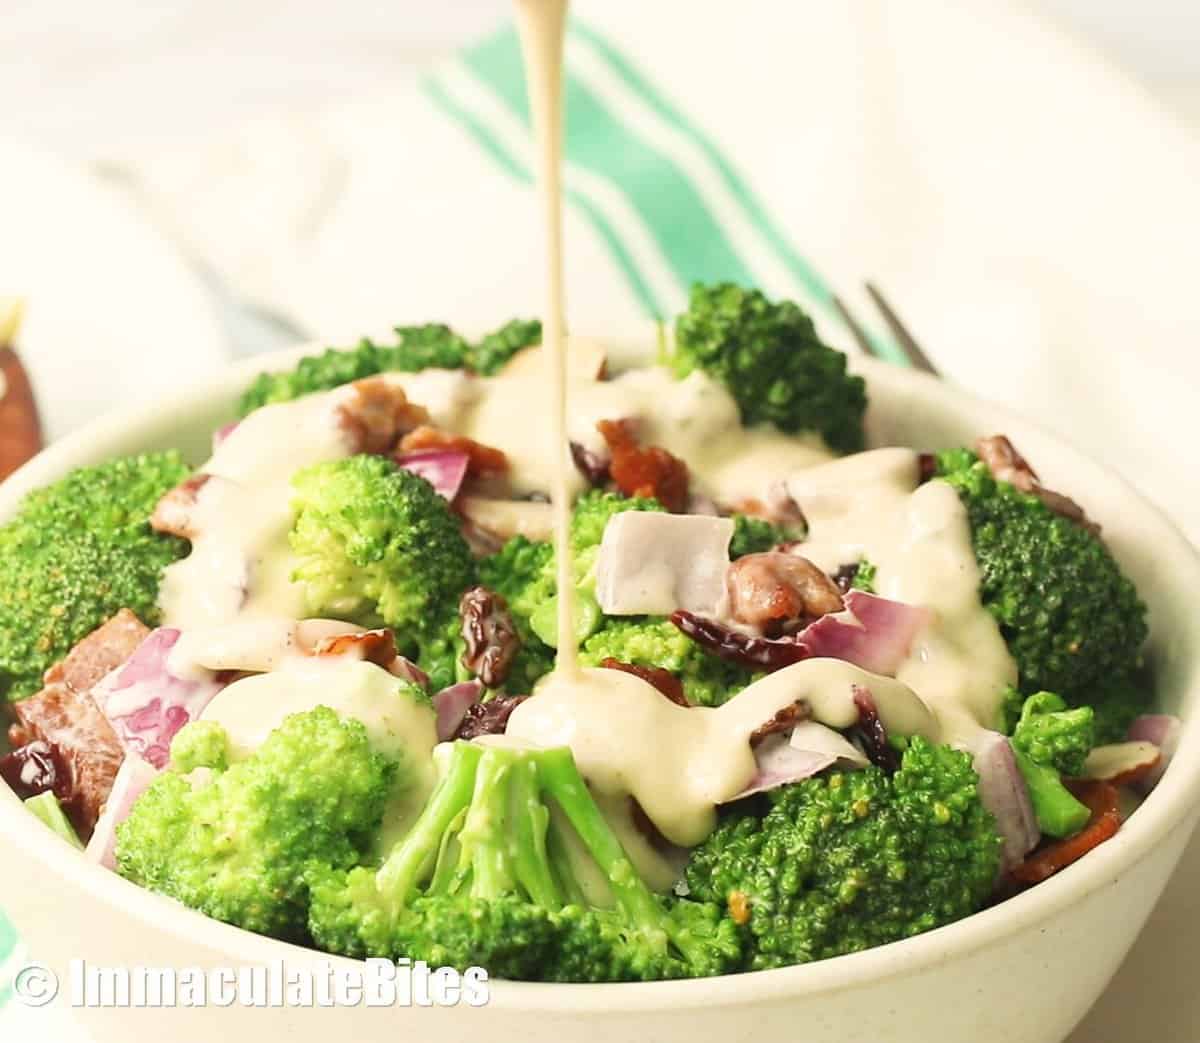 Drizzling salad dressing on the bacon and broccoli salad